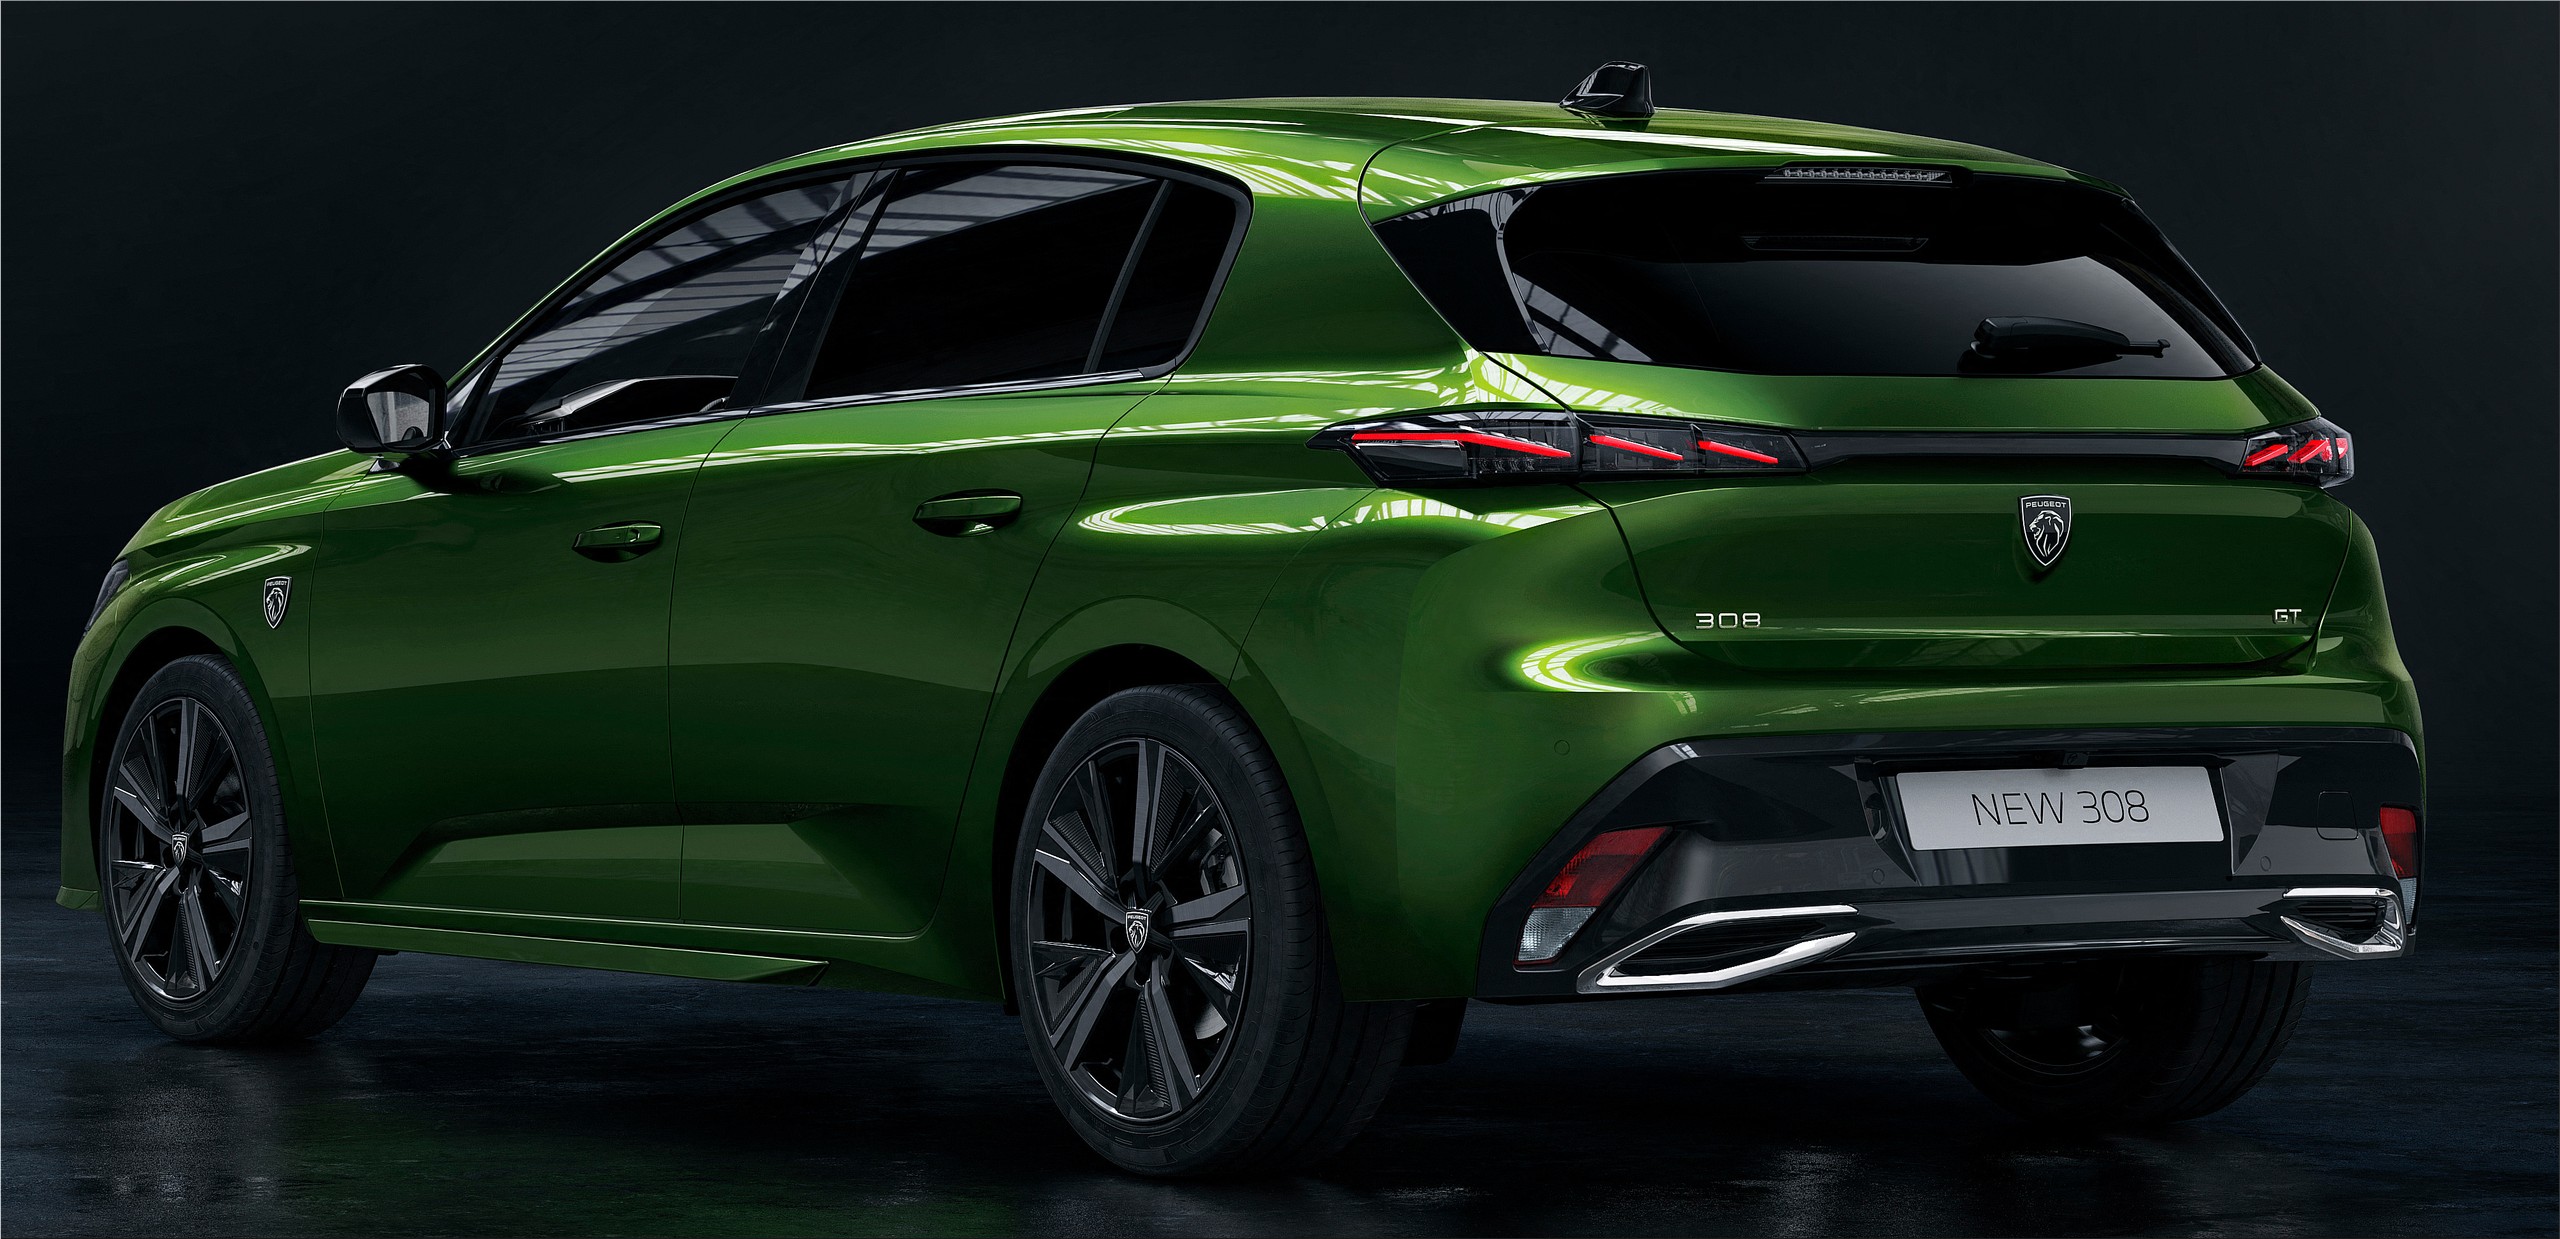 Is the new Peugeot 308 GT all show and no substance?